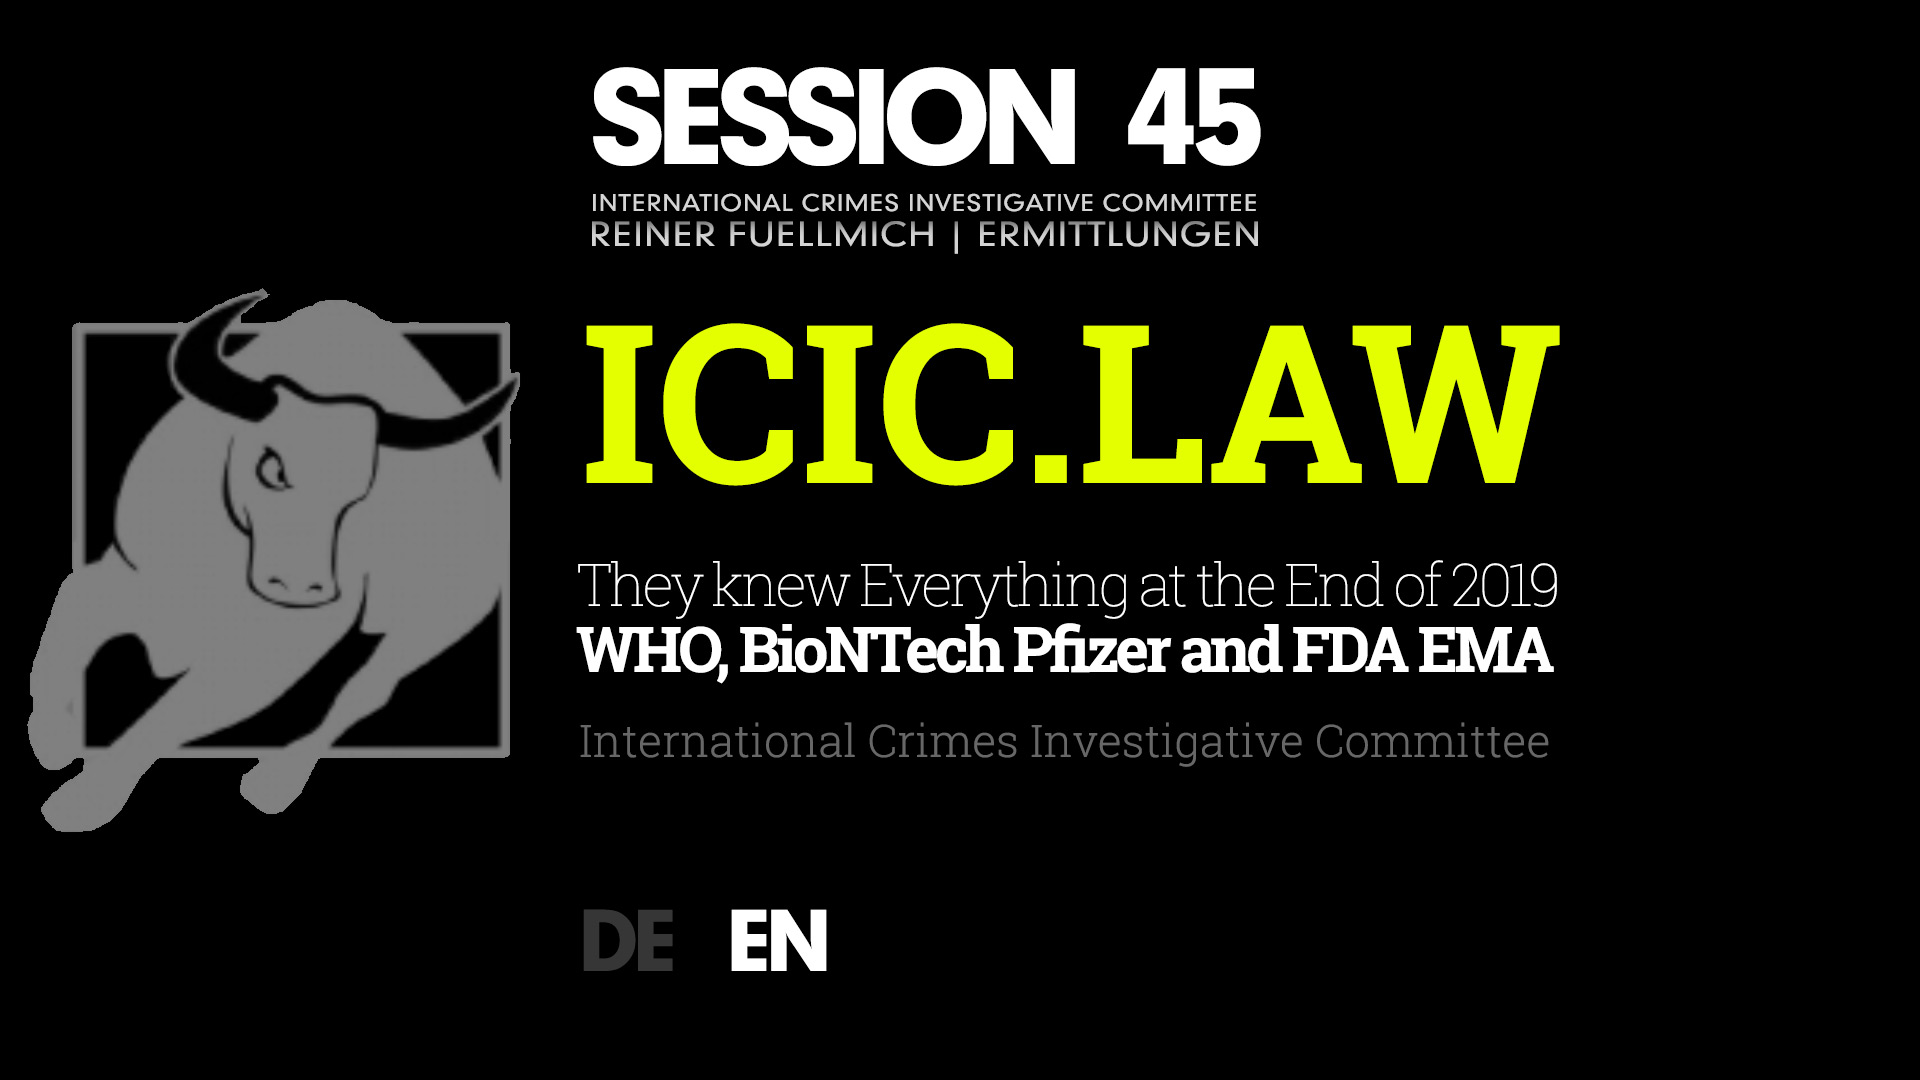 ICIC | SESSION 45 - WHO, BioNTech Pfizer and FDA EMA Knew Everything at the End of 2019